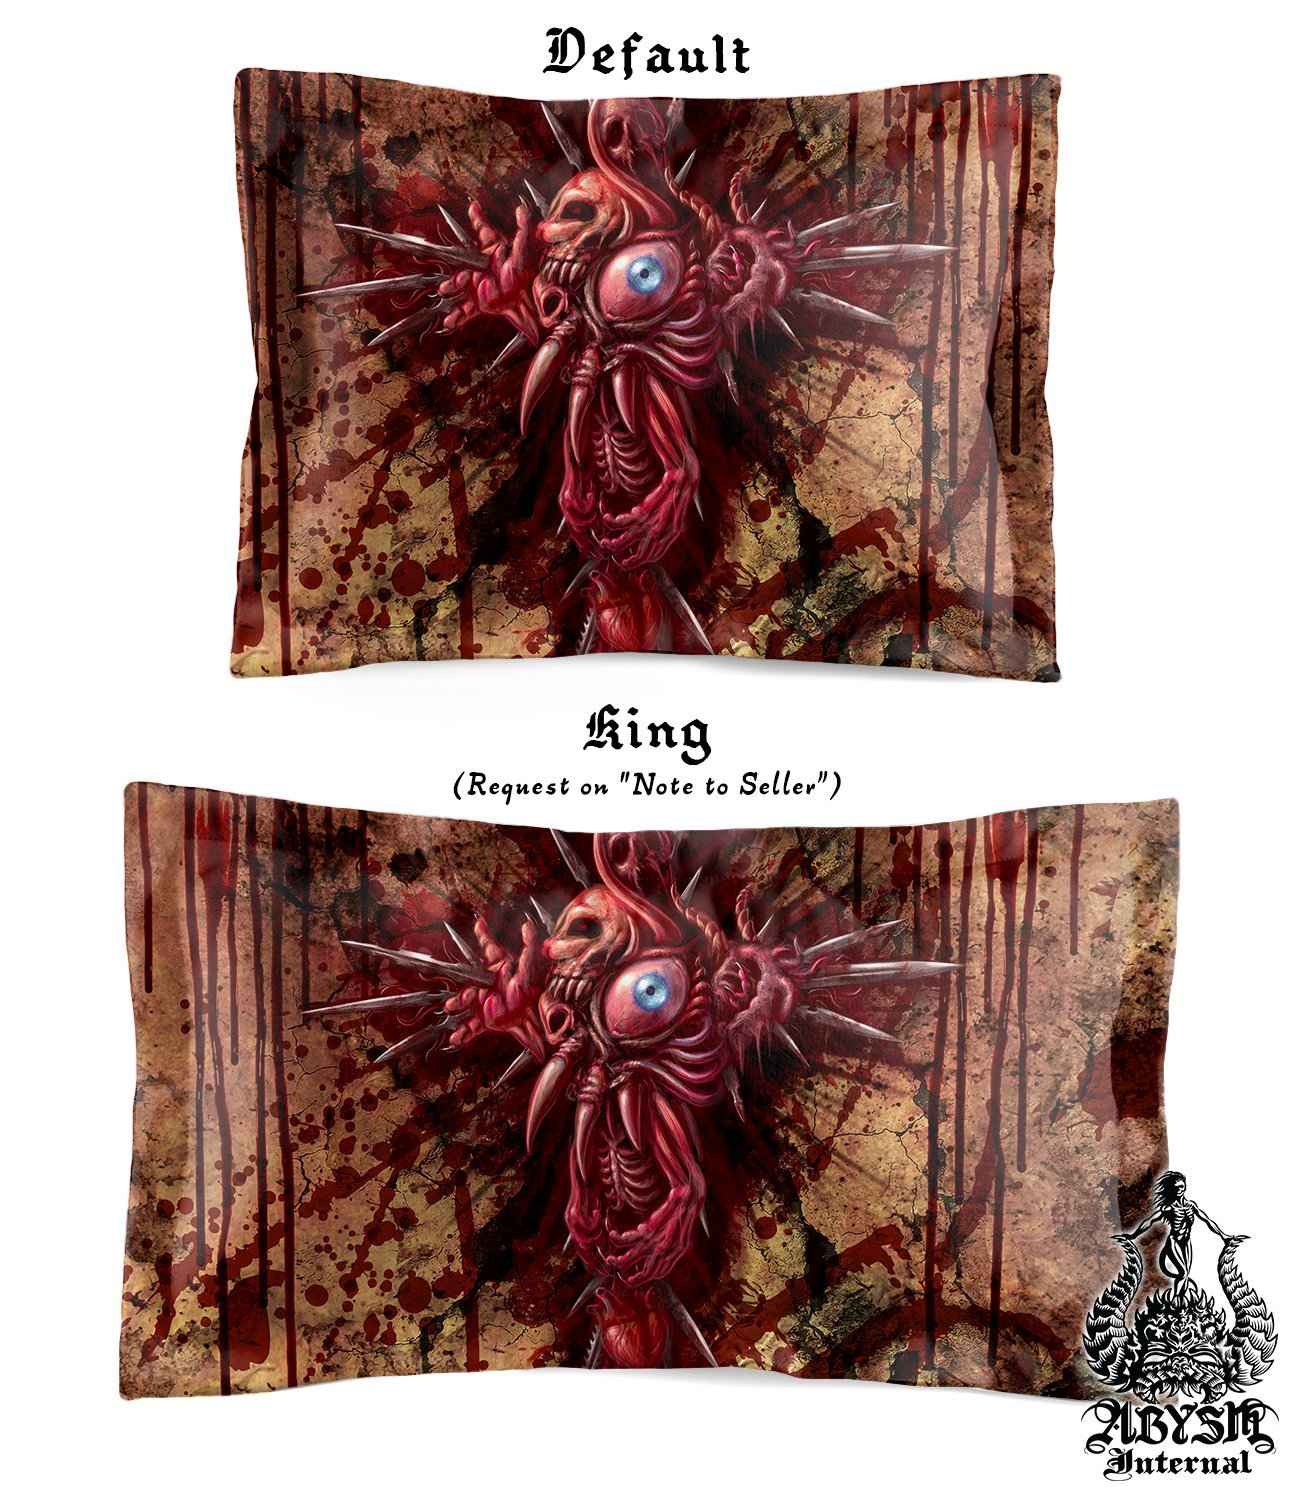 Horror Bedding Set, Comforter and Duvet, Halloween Bed Cover and Bedroom Decor, King, Queen and Twin Size - Gore Cross, Dark Grunge - Abysm Internal